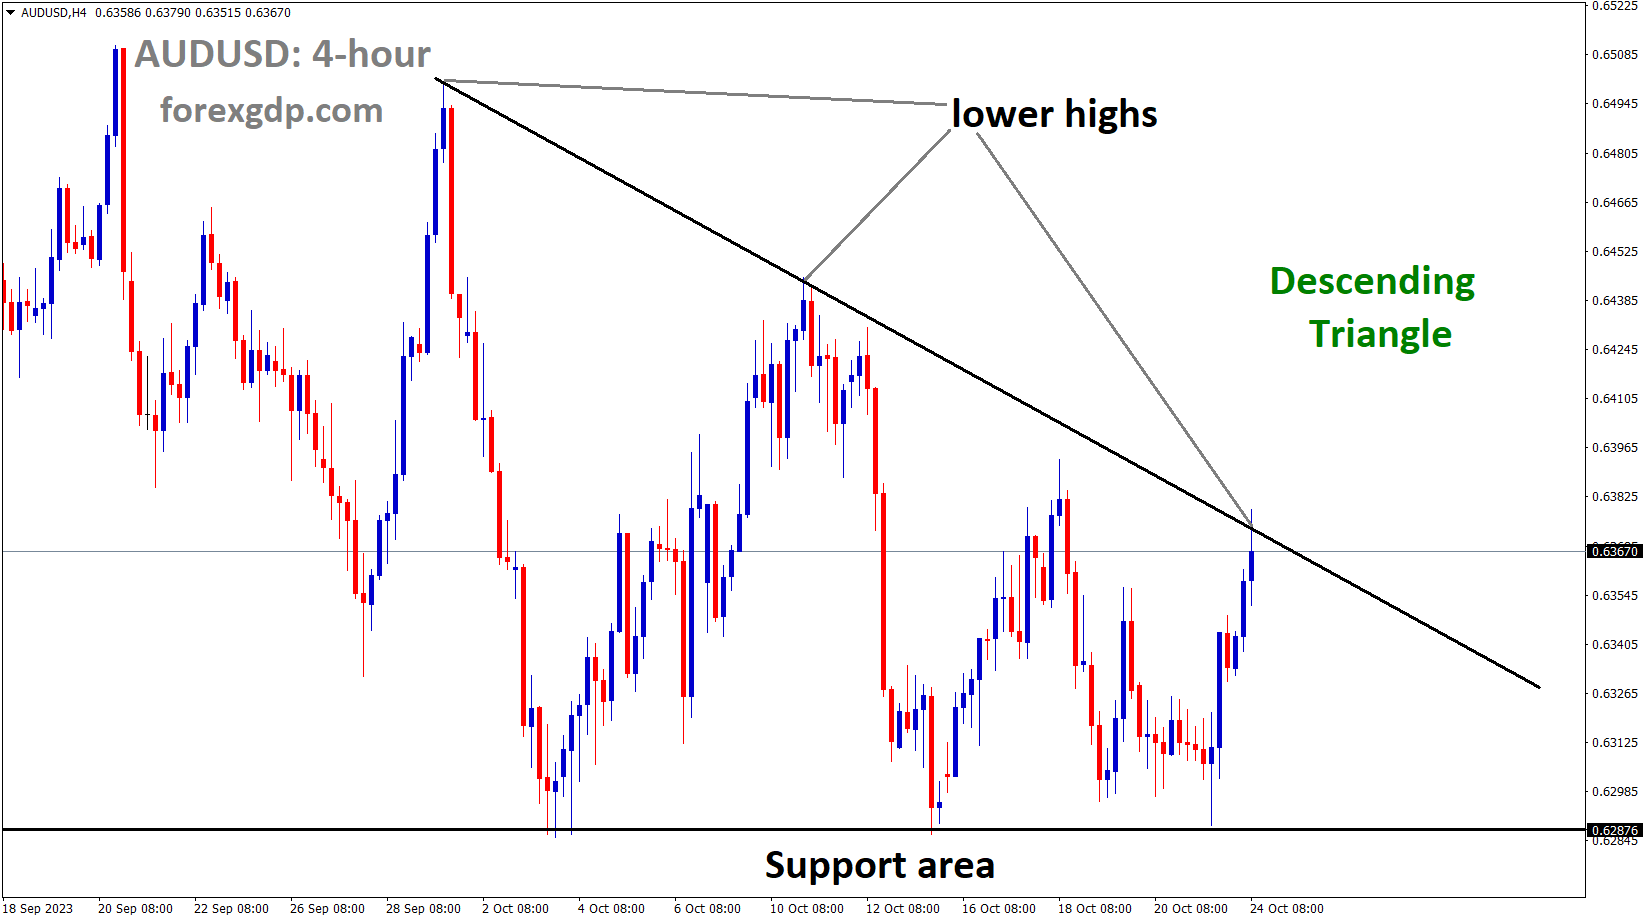 AUDUSD is moving in the Descending triangle pattern and the market has reached the lower high area of the pattern